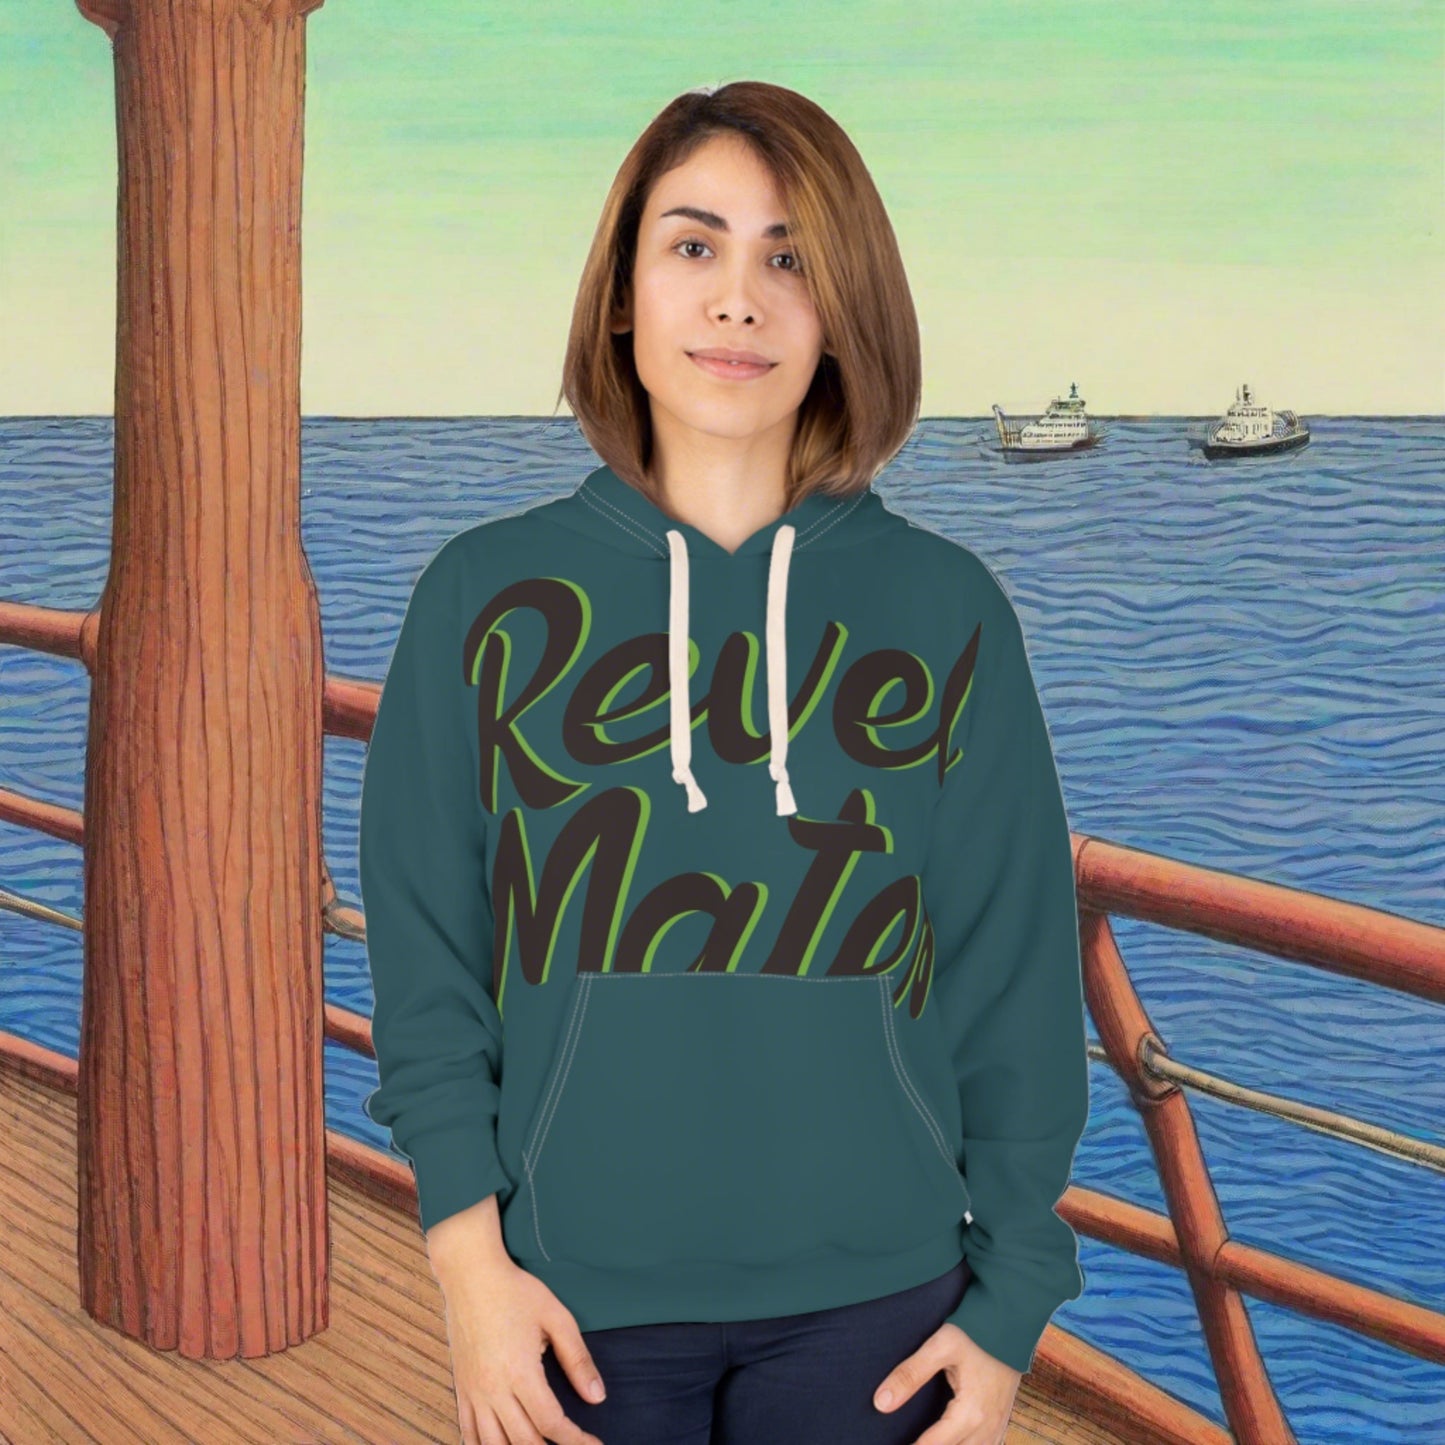 Unisex Cut & Sew Pullover Hoodie | All Over Print Hoodie | Turquoise & Brown RevelMates Design